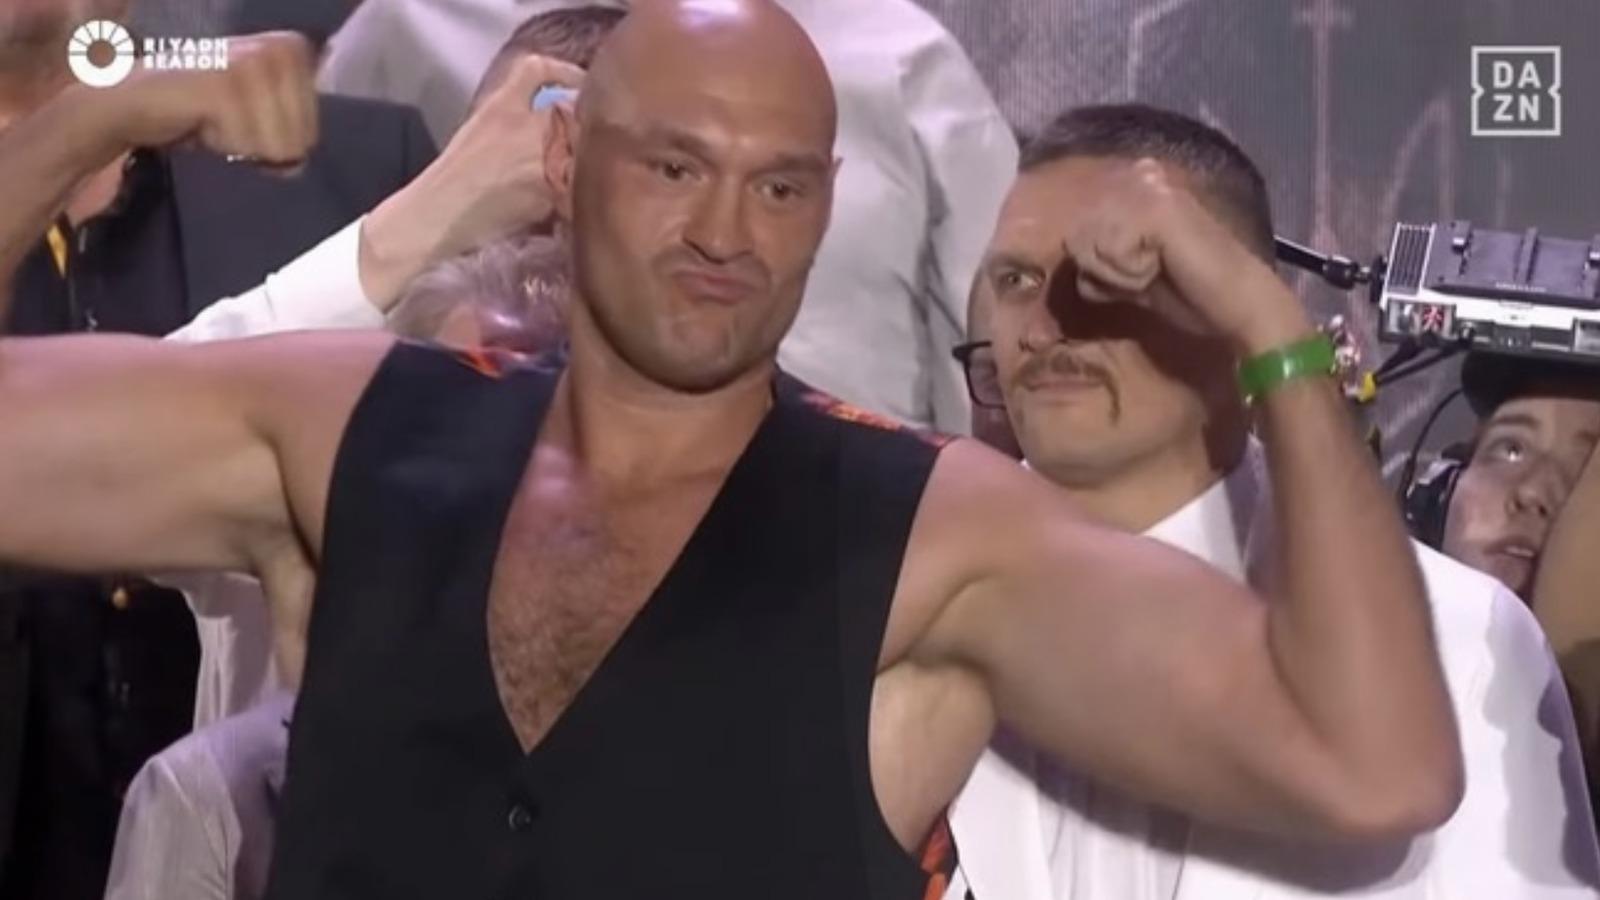 Tyson Fury wouldn’t even acknowledge Oleksandr Usyk during their pre-fight press conference